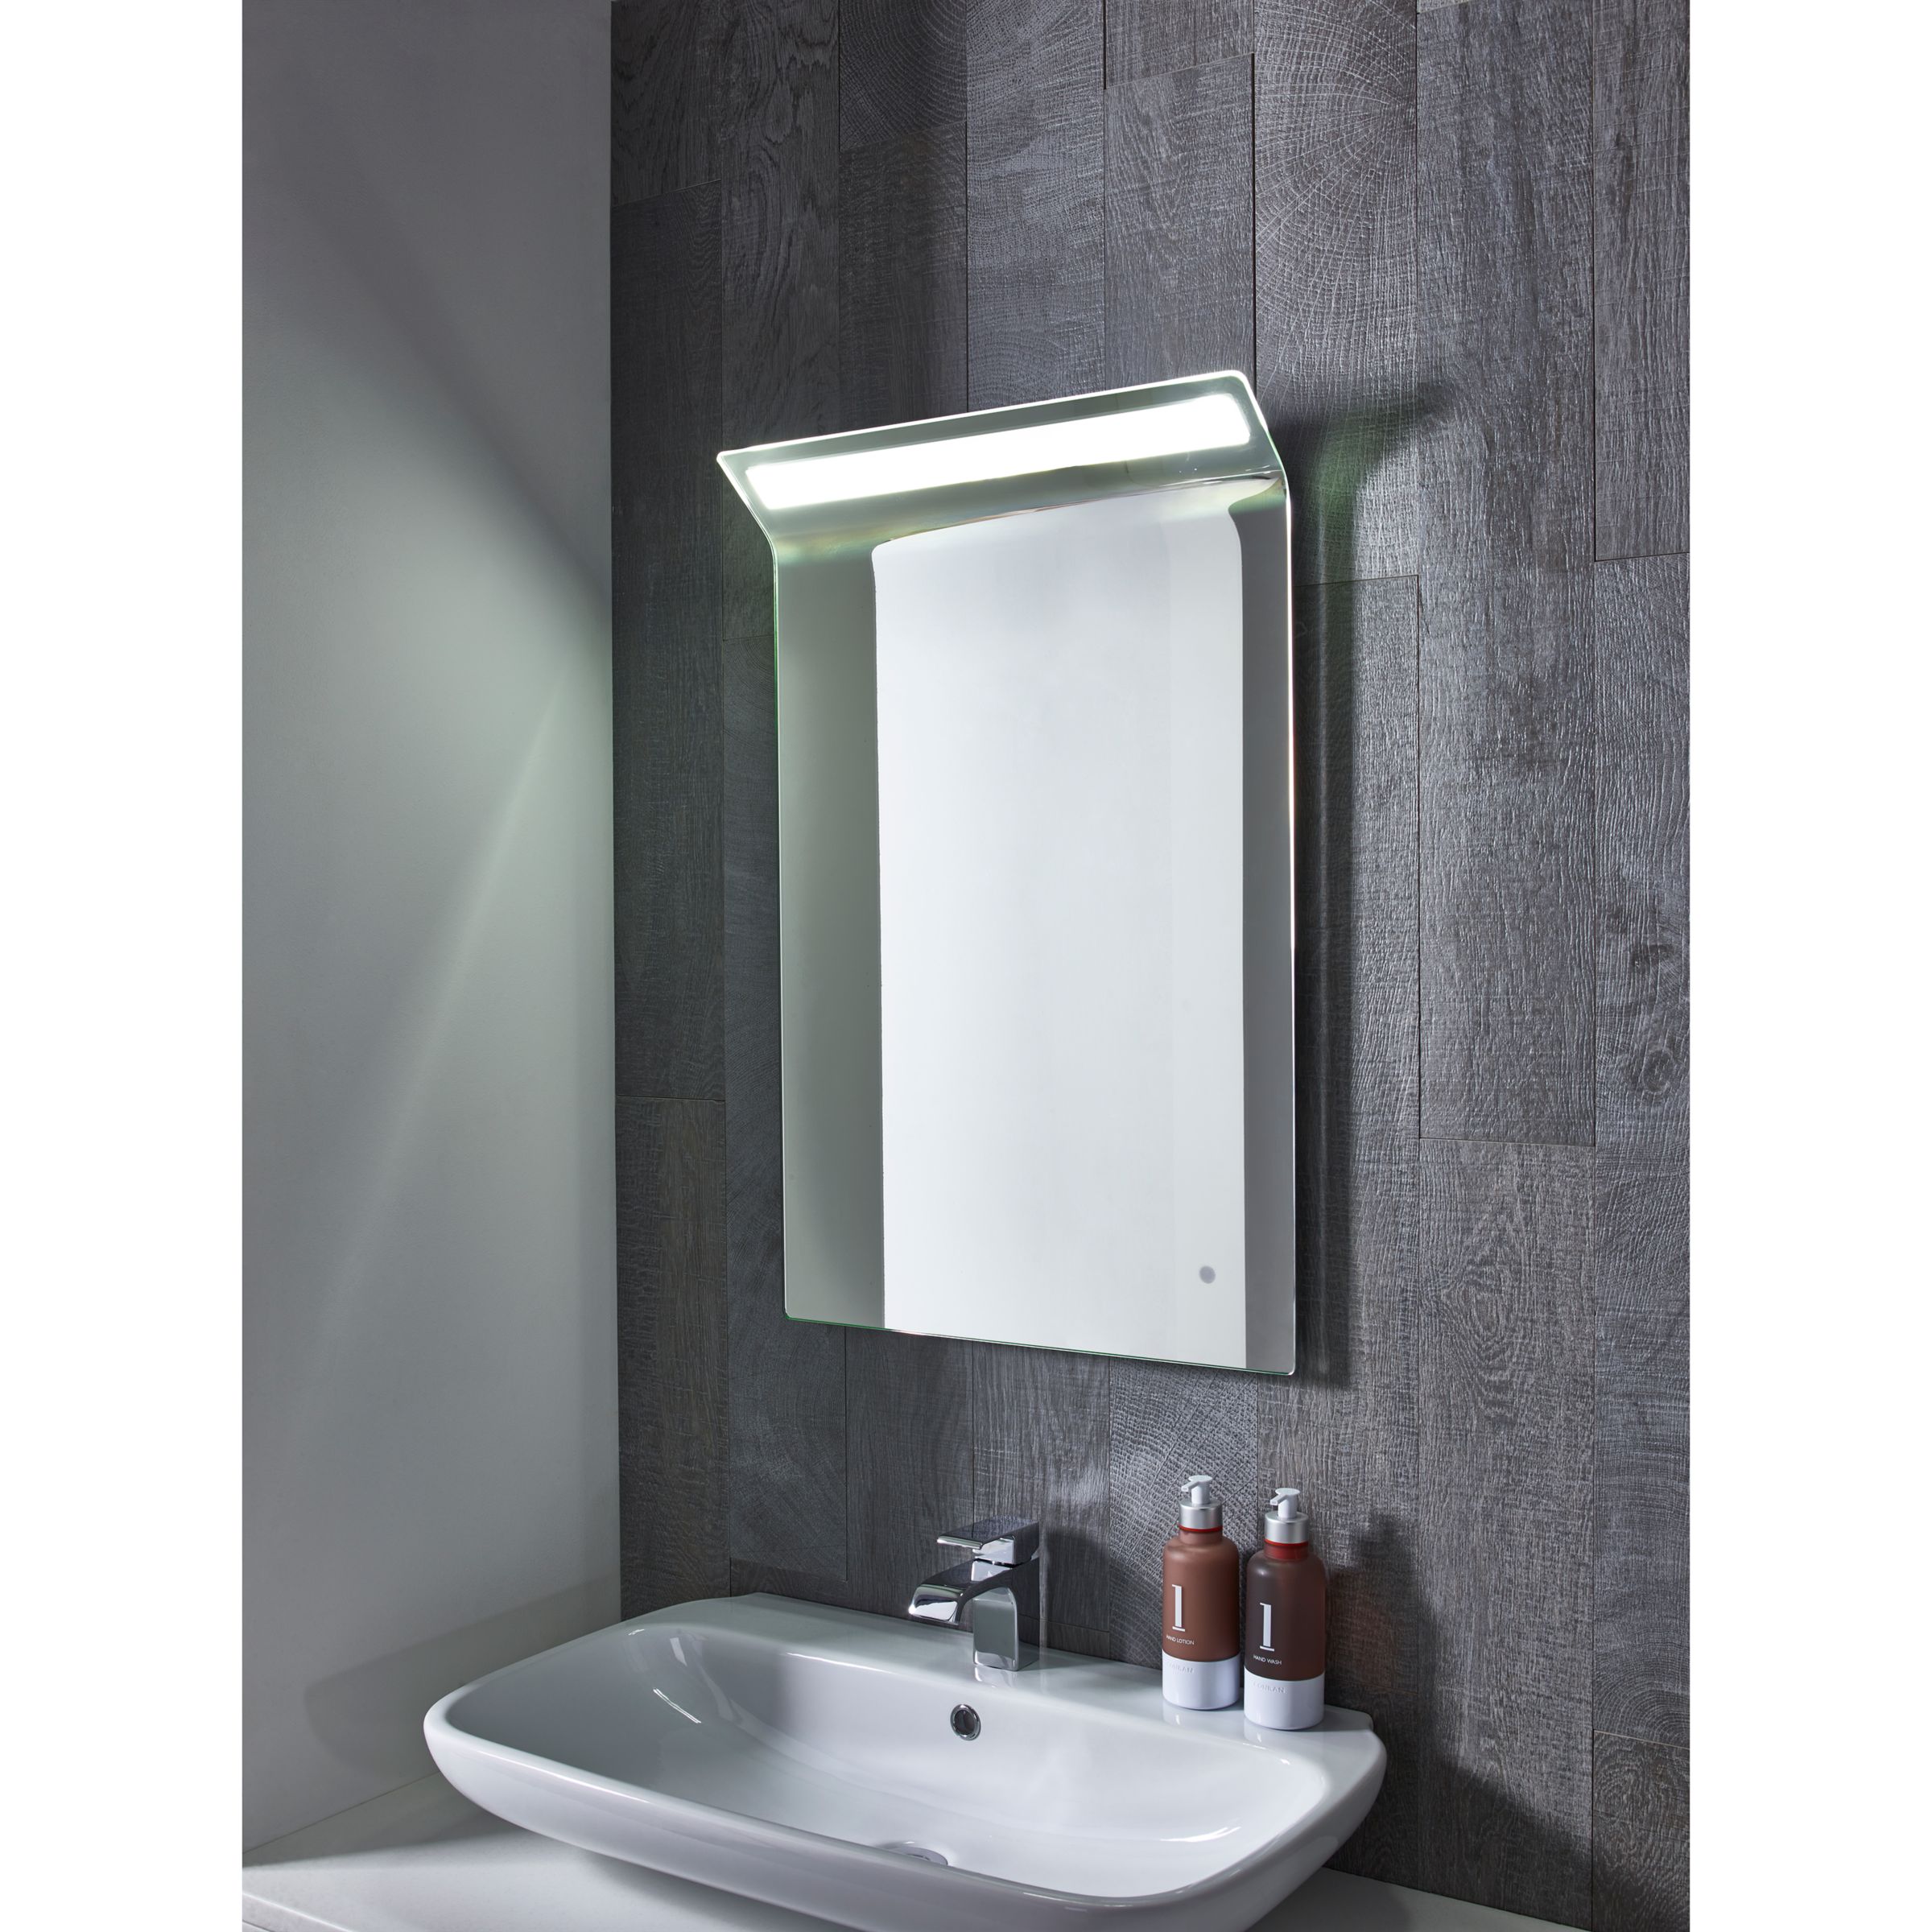 Lights Roper Rhodes Mirrors Bathroom With